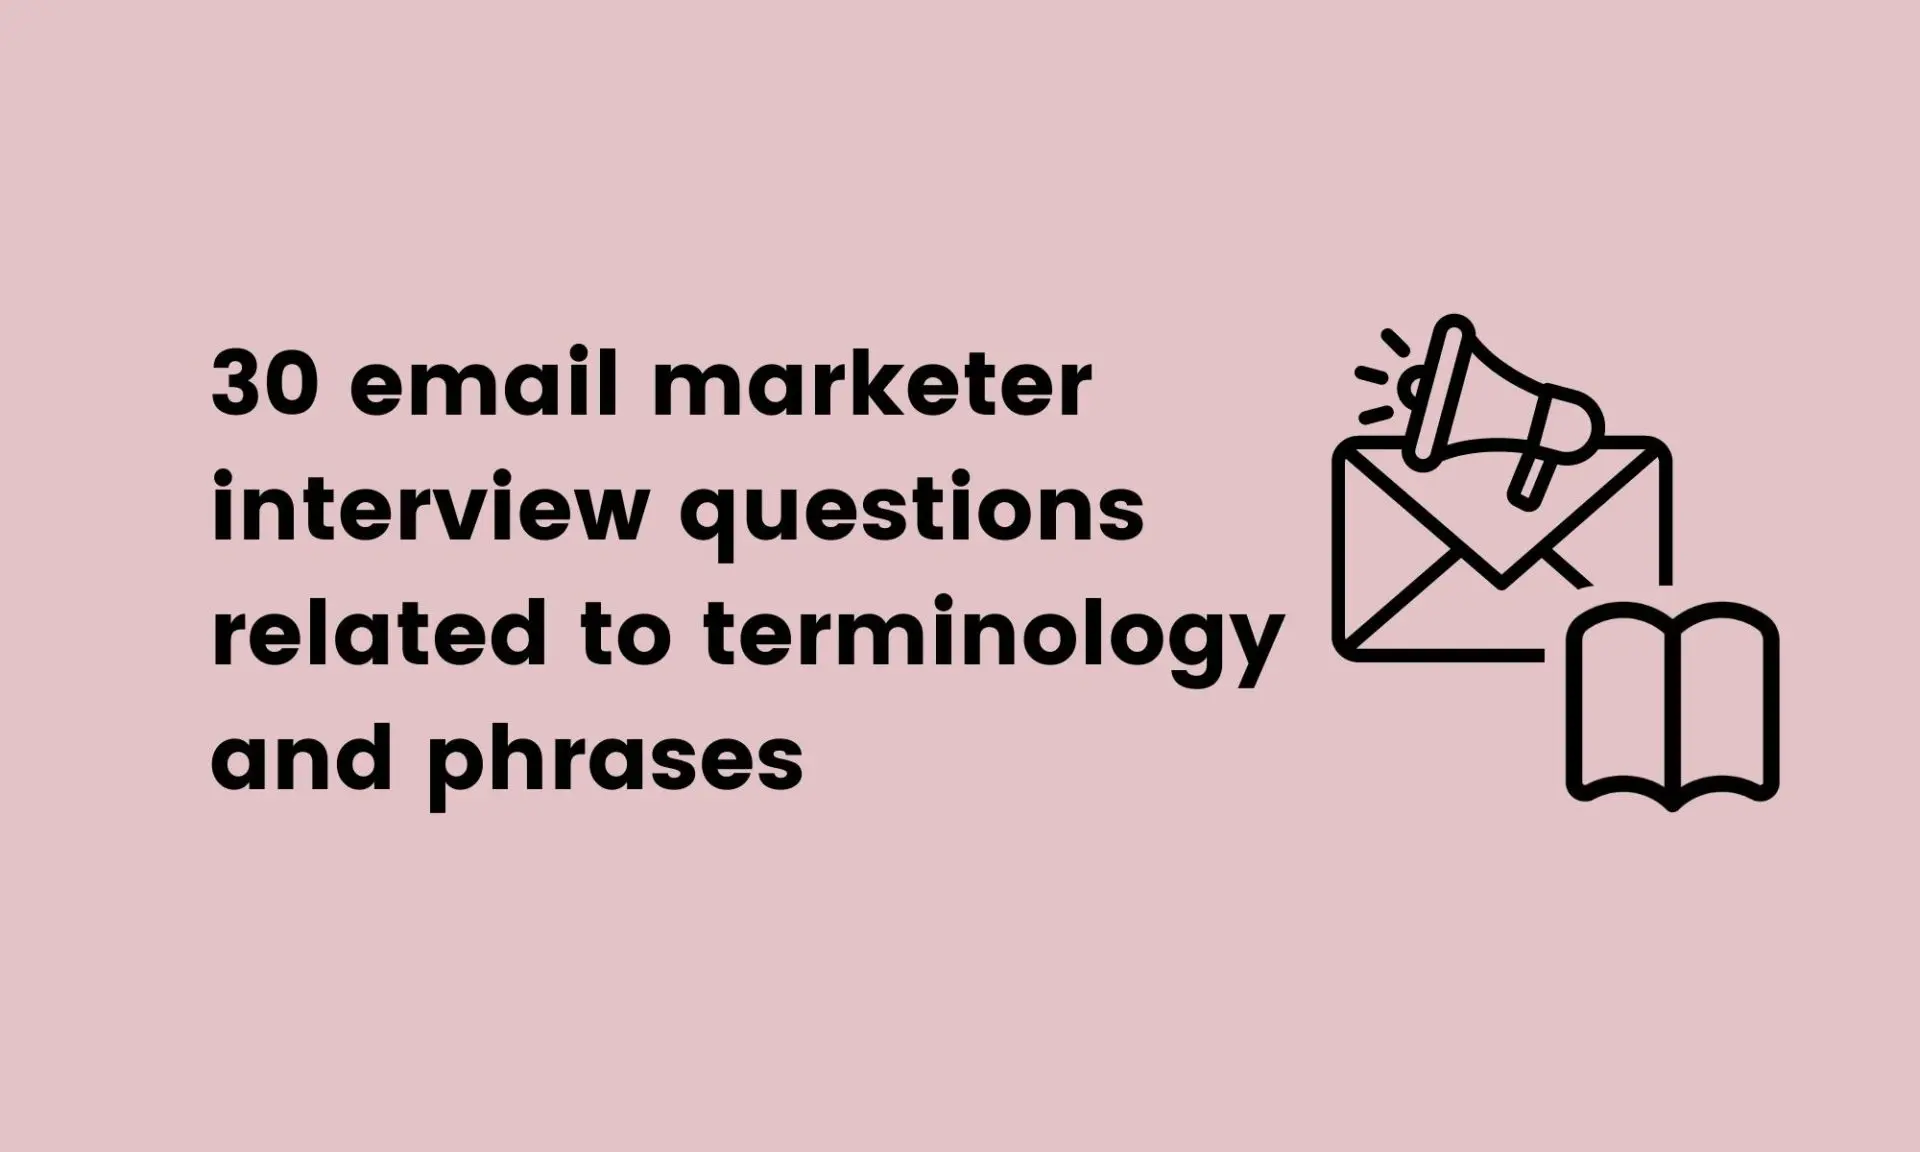 30 email marketer interview questions related to terminology and phrases